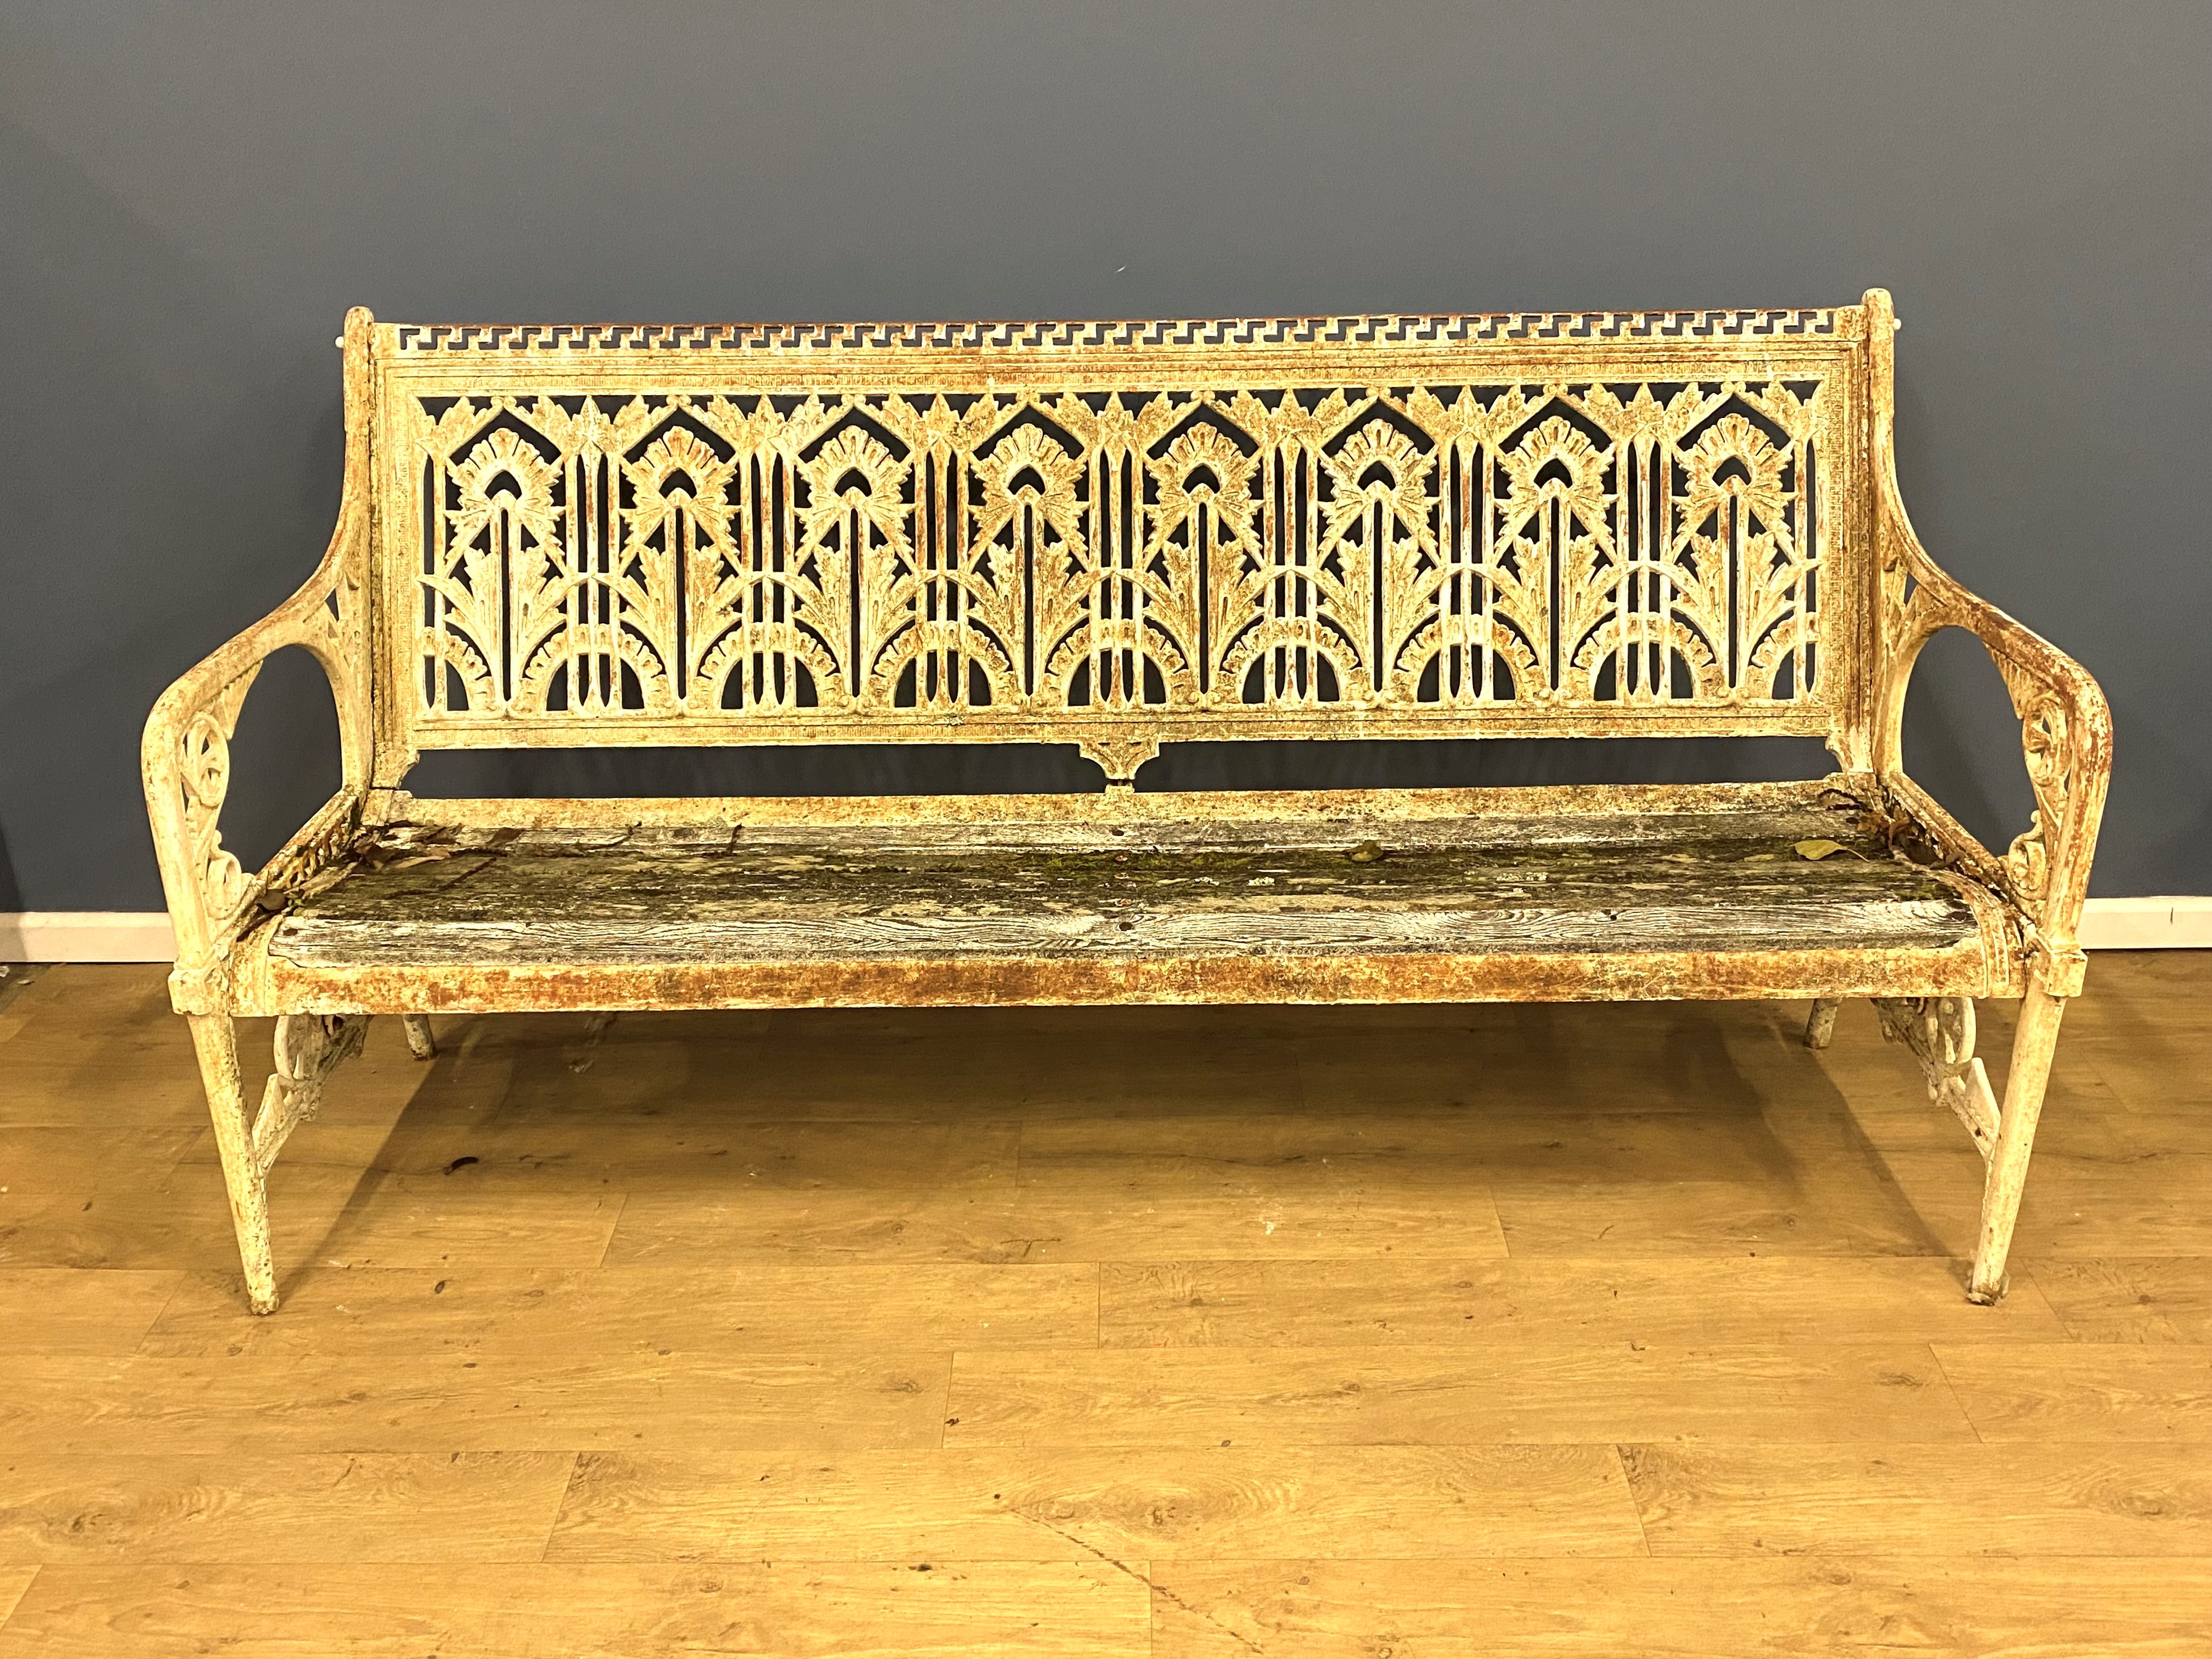 Cast iron Coalbrookdale style garden bench. From the Estate of Dame Mary Quant